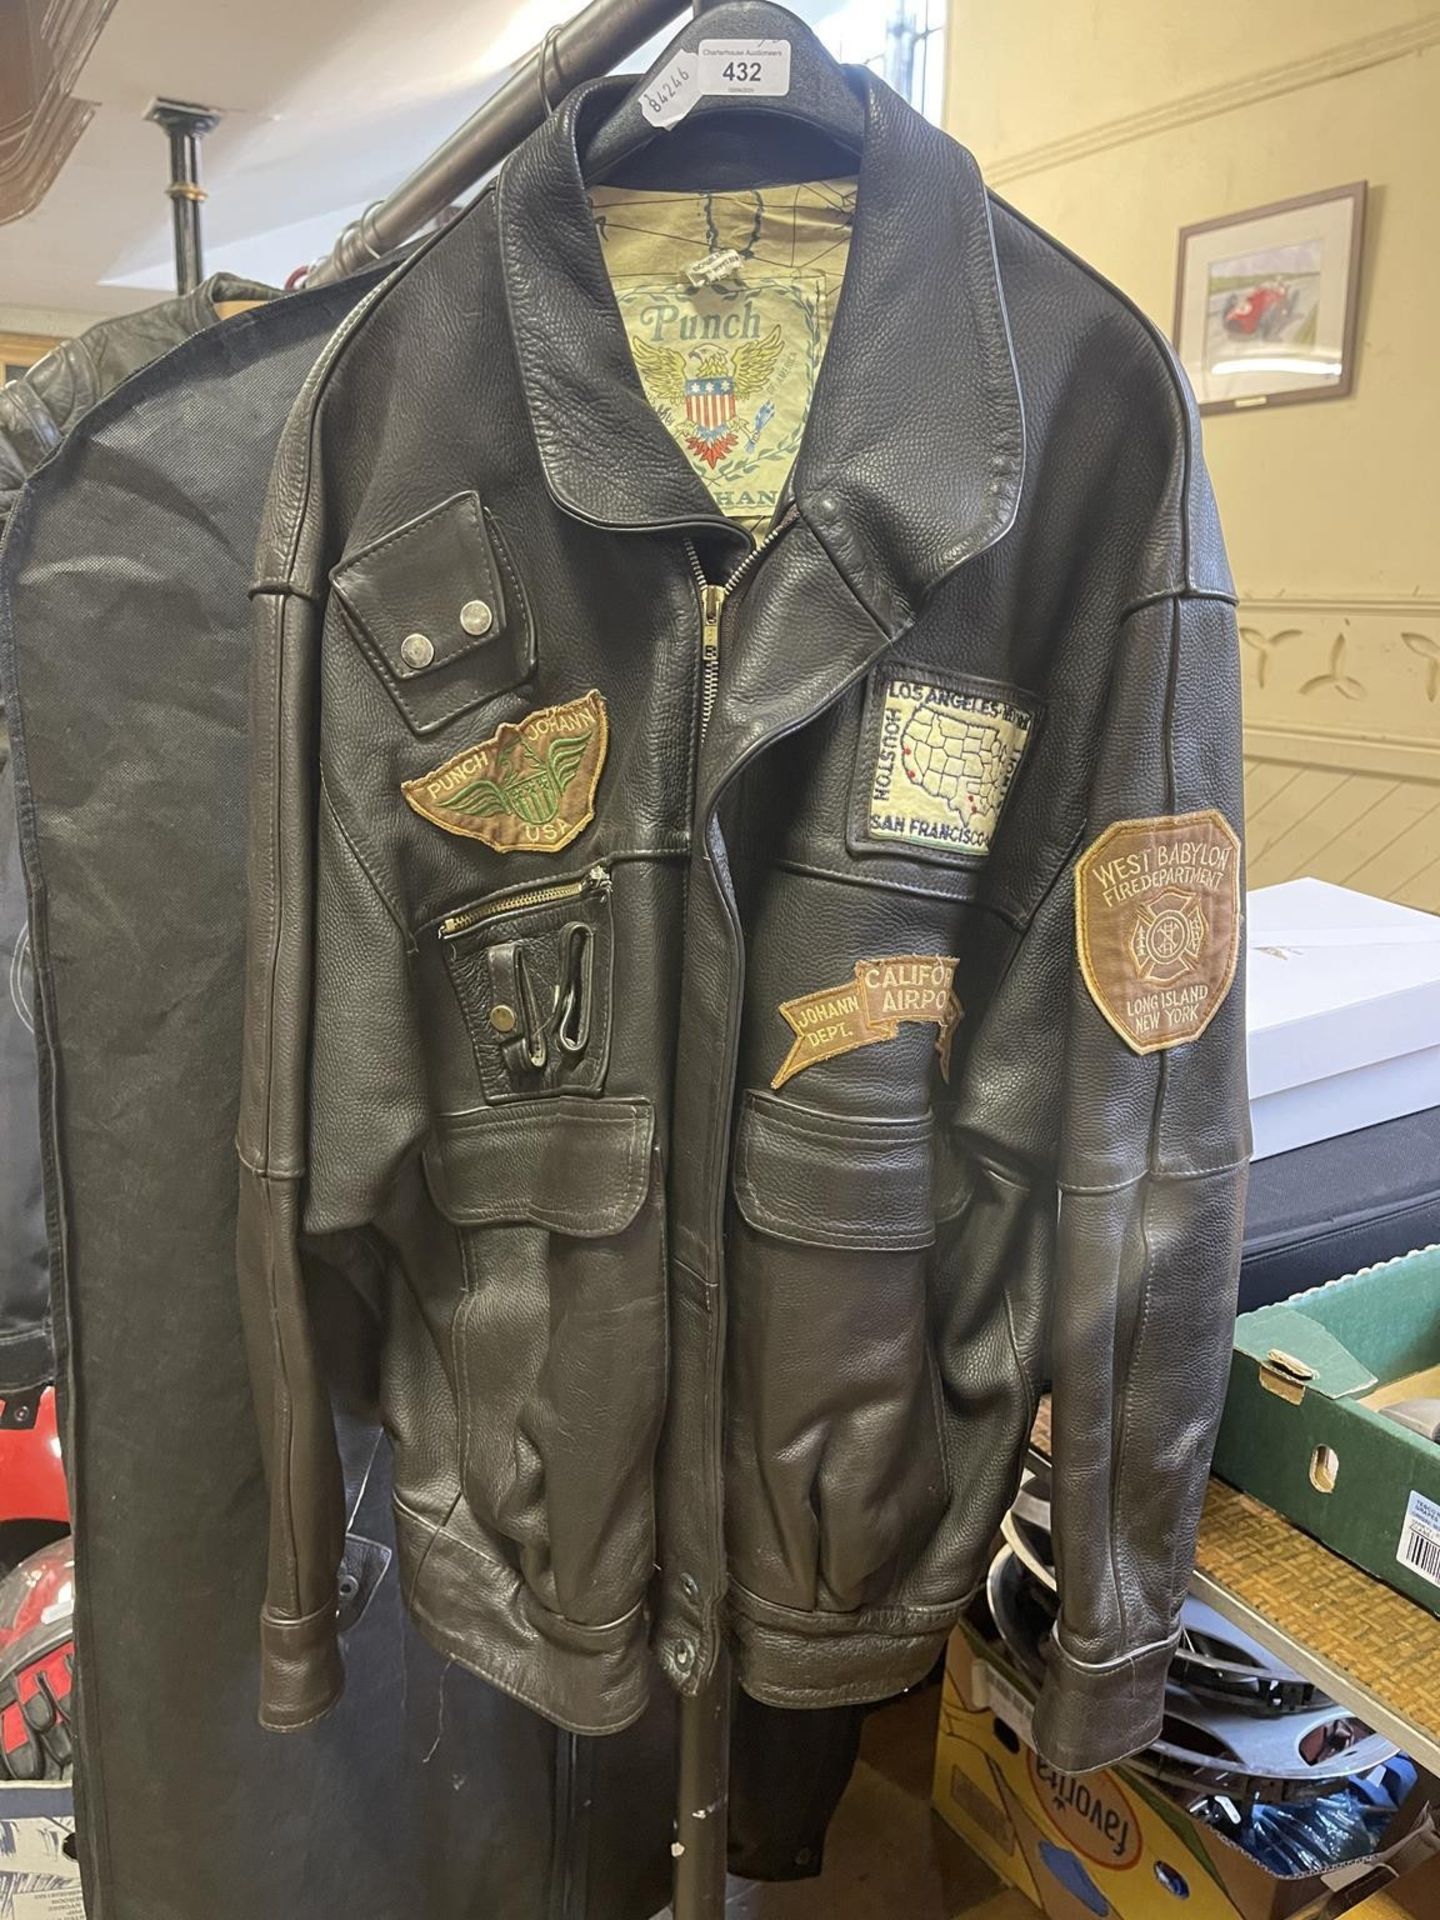 A Punch by Johann leather jacket, with various cloth badges, asssorted motorcycle related belt